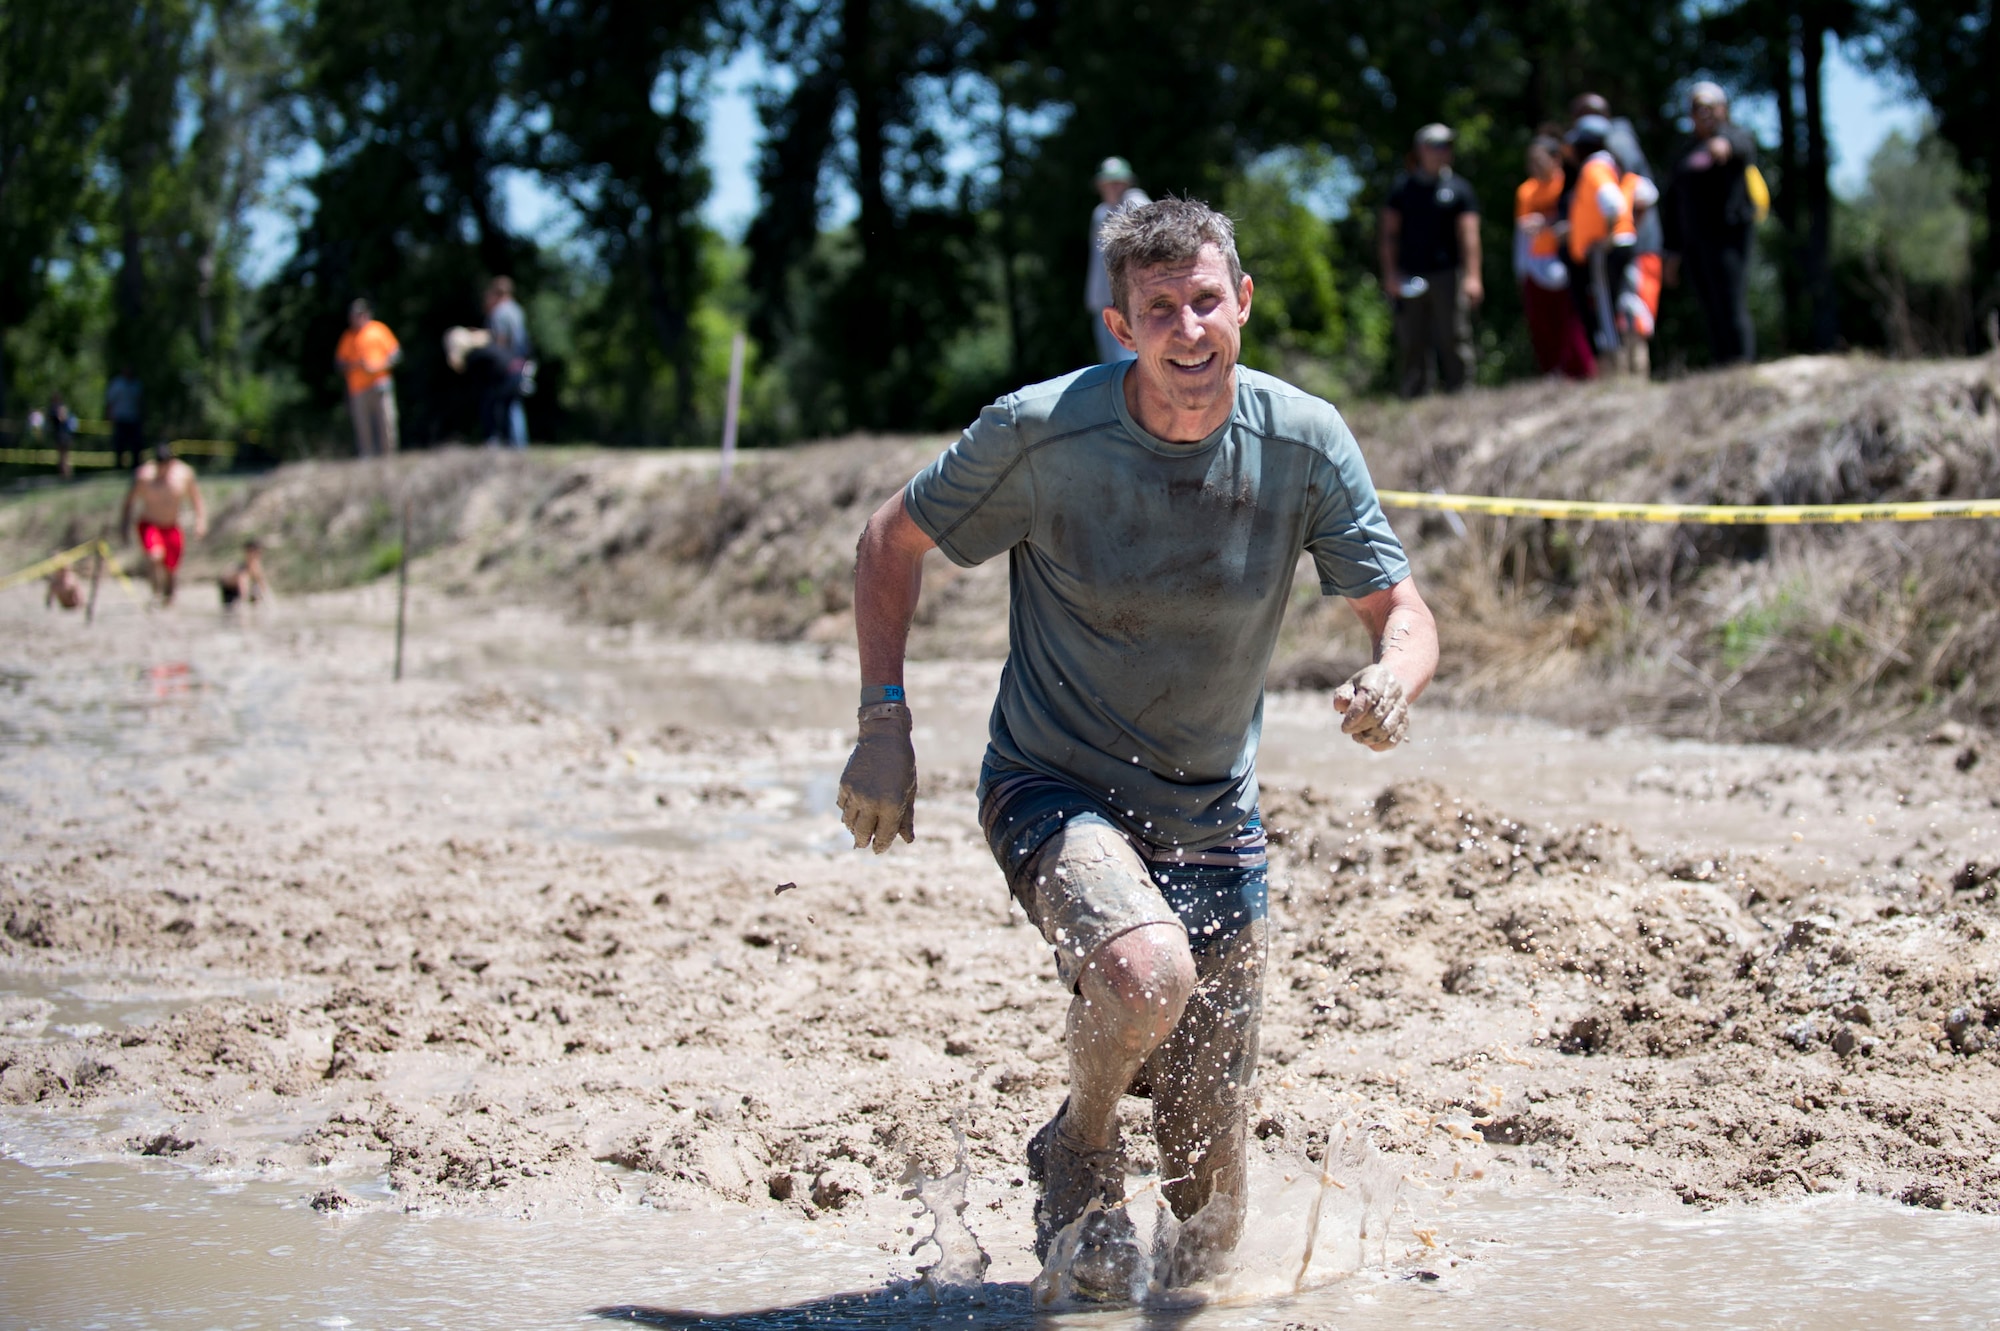 Col. Thomas Kunkel, 23d Wing commander, completes the last obstacle during the annual Moody Mud Run, May 6, 2017, in Ray City, Ga. The Fourth Annual Moody Mud consisted of both adult and child course that challenged more than 600 participants with obstacles over 4.2 miles. (U.S. Air Force photo by Airman 1st Class Daniel Snider)